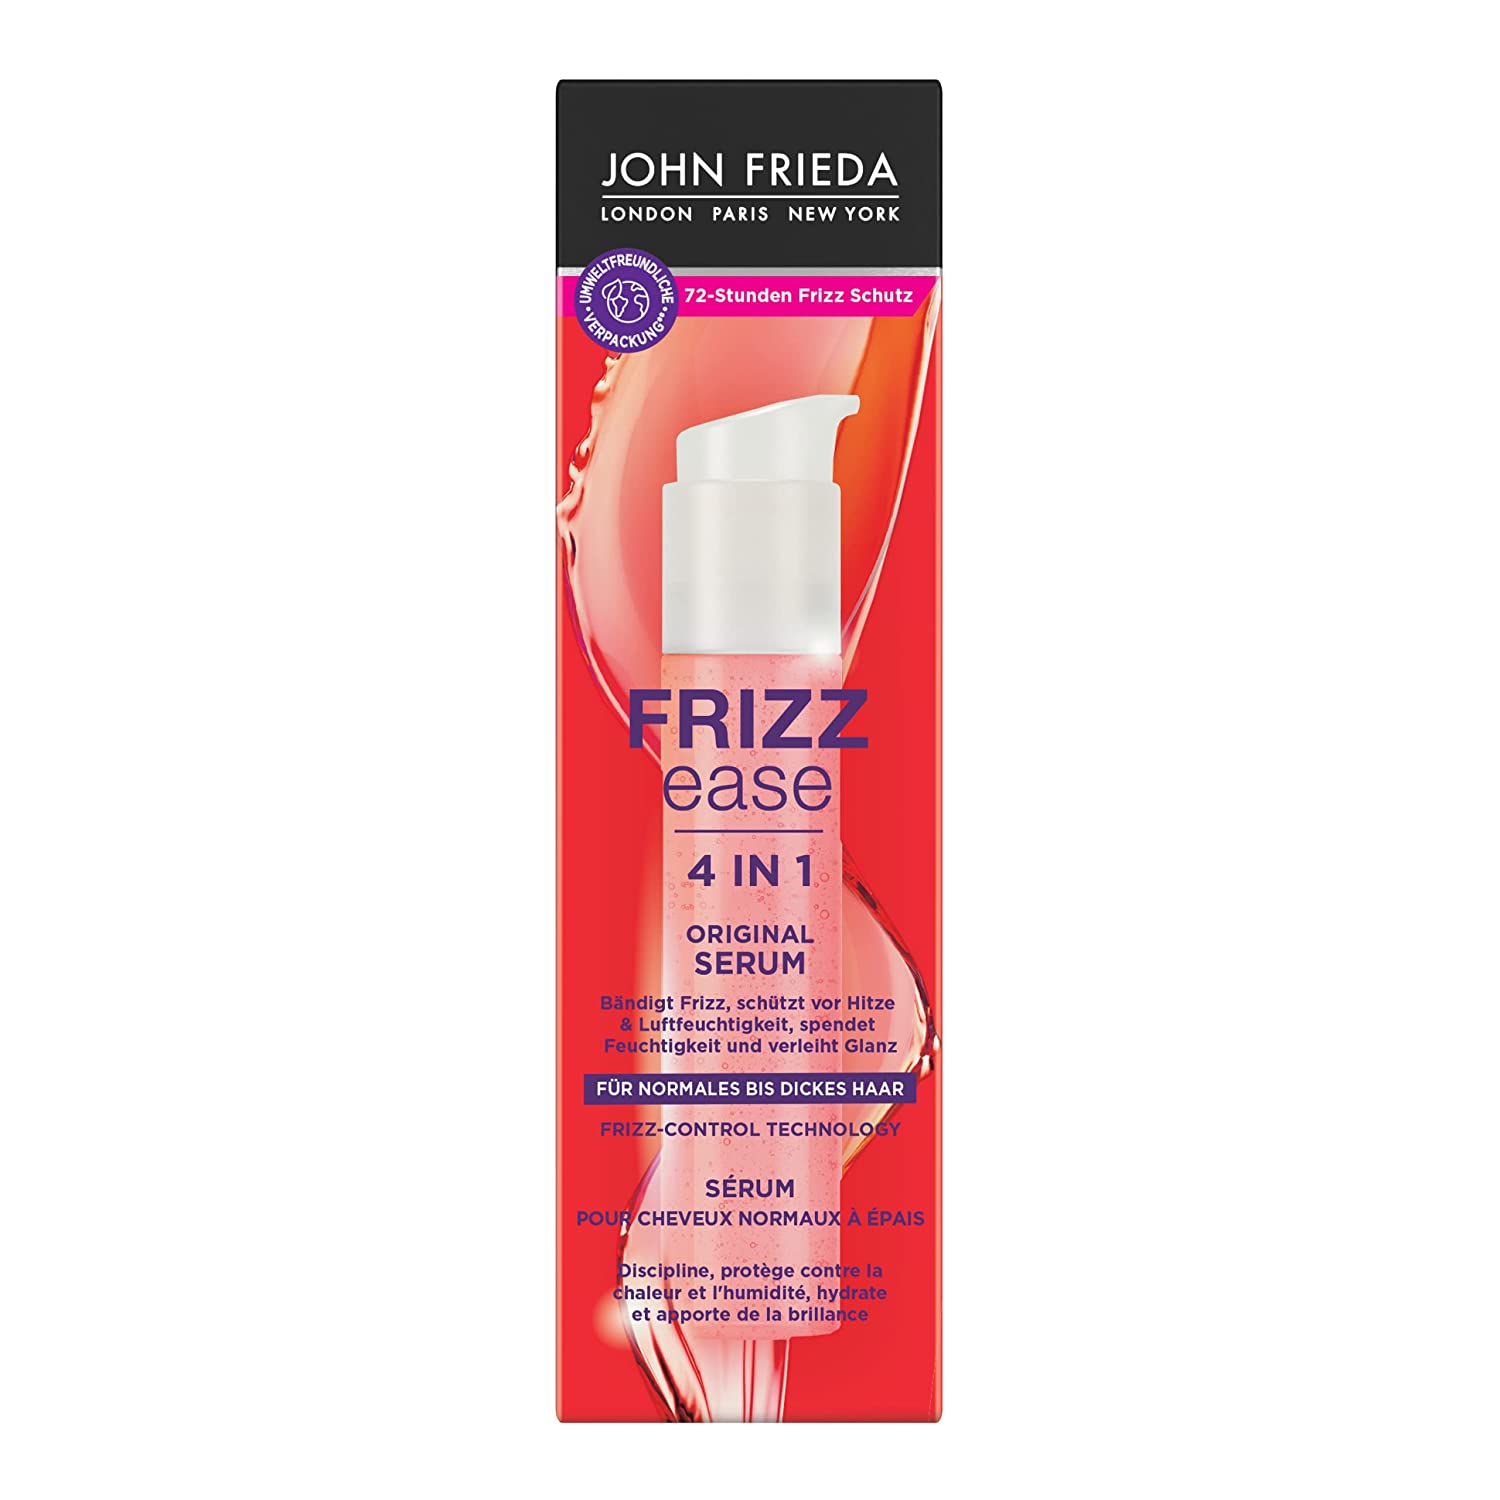 John Frieda 4-in-1 Original Serum - Contents: 50 ml - Hair type: normal to thick - from the Frizz Ease Series - Tames frizz - Protects against heat and humidity, ‎red